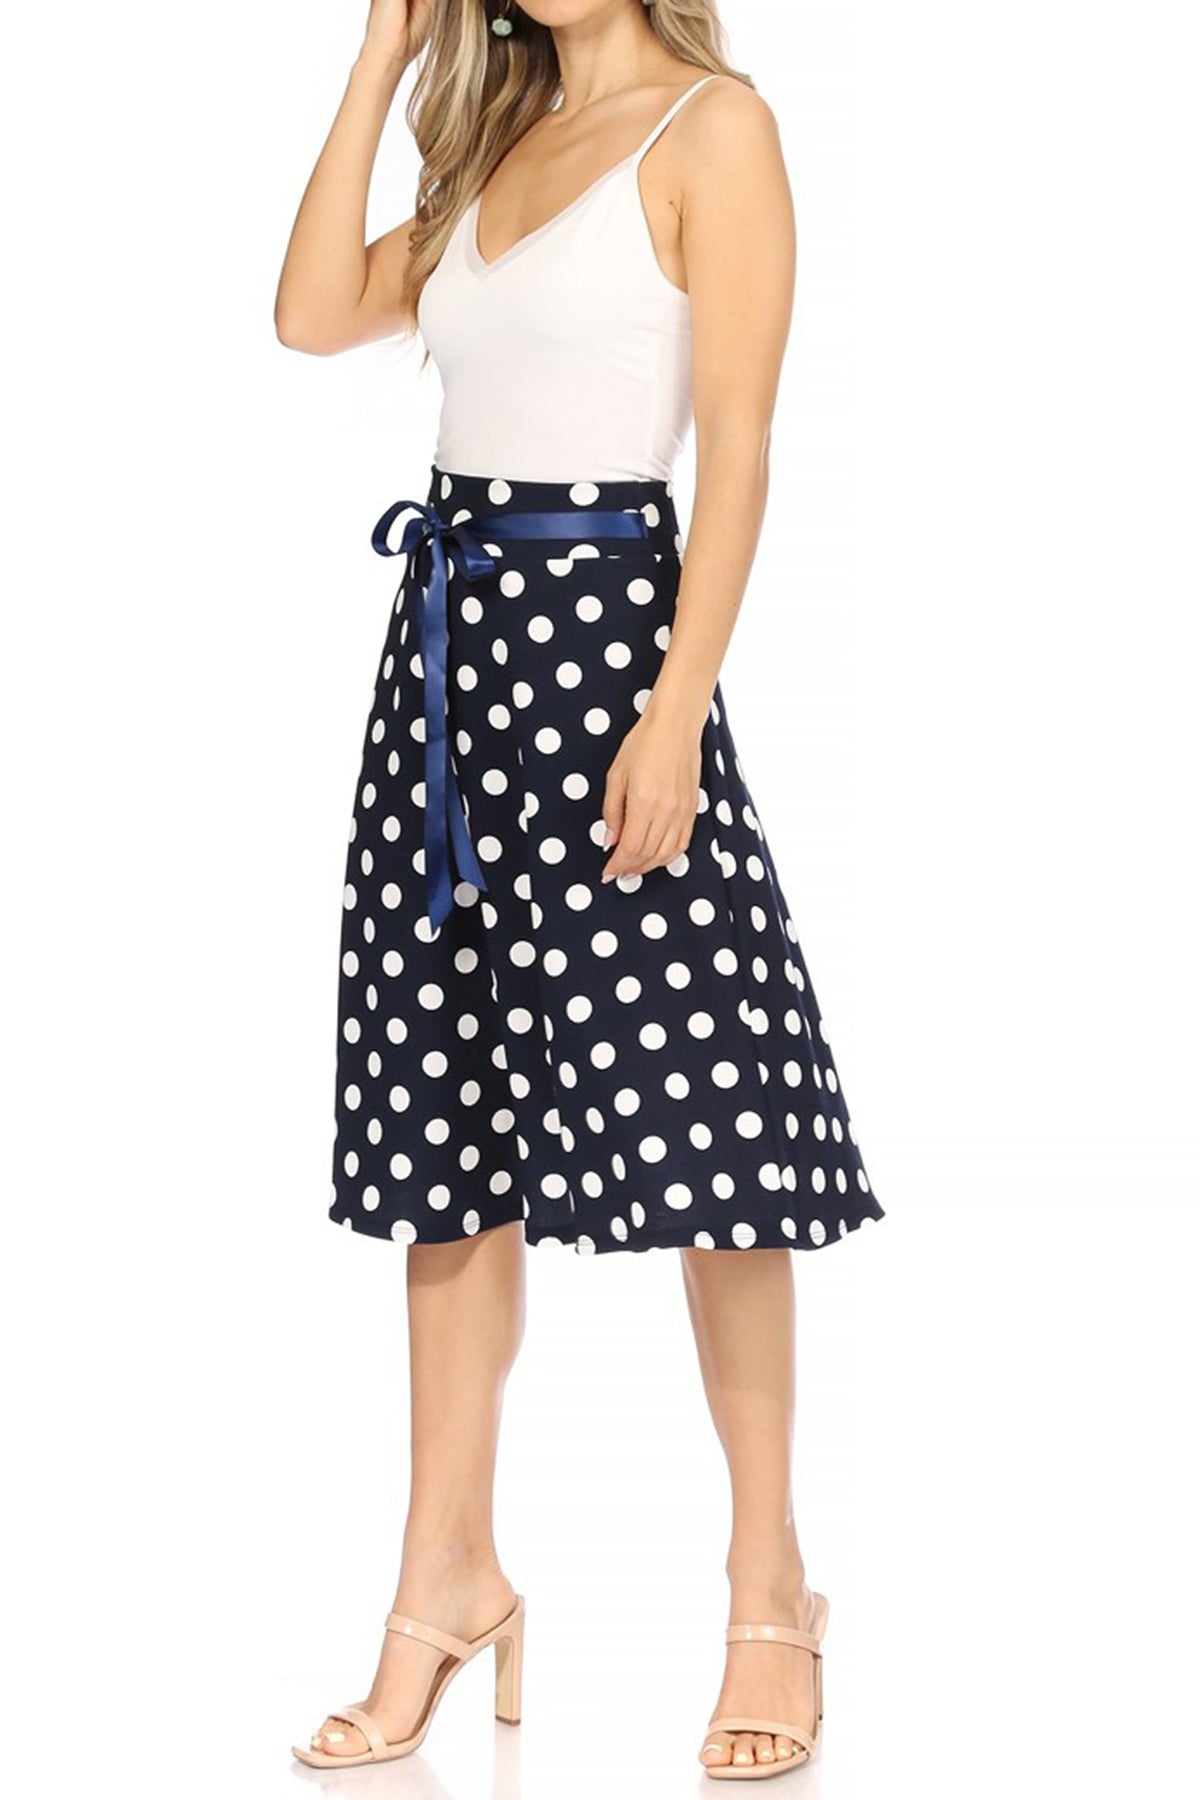 Women's Casual Floral A-line Printed High Waist Bow Tie Belted Knee Length Midi Skirt